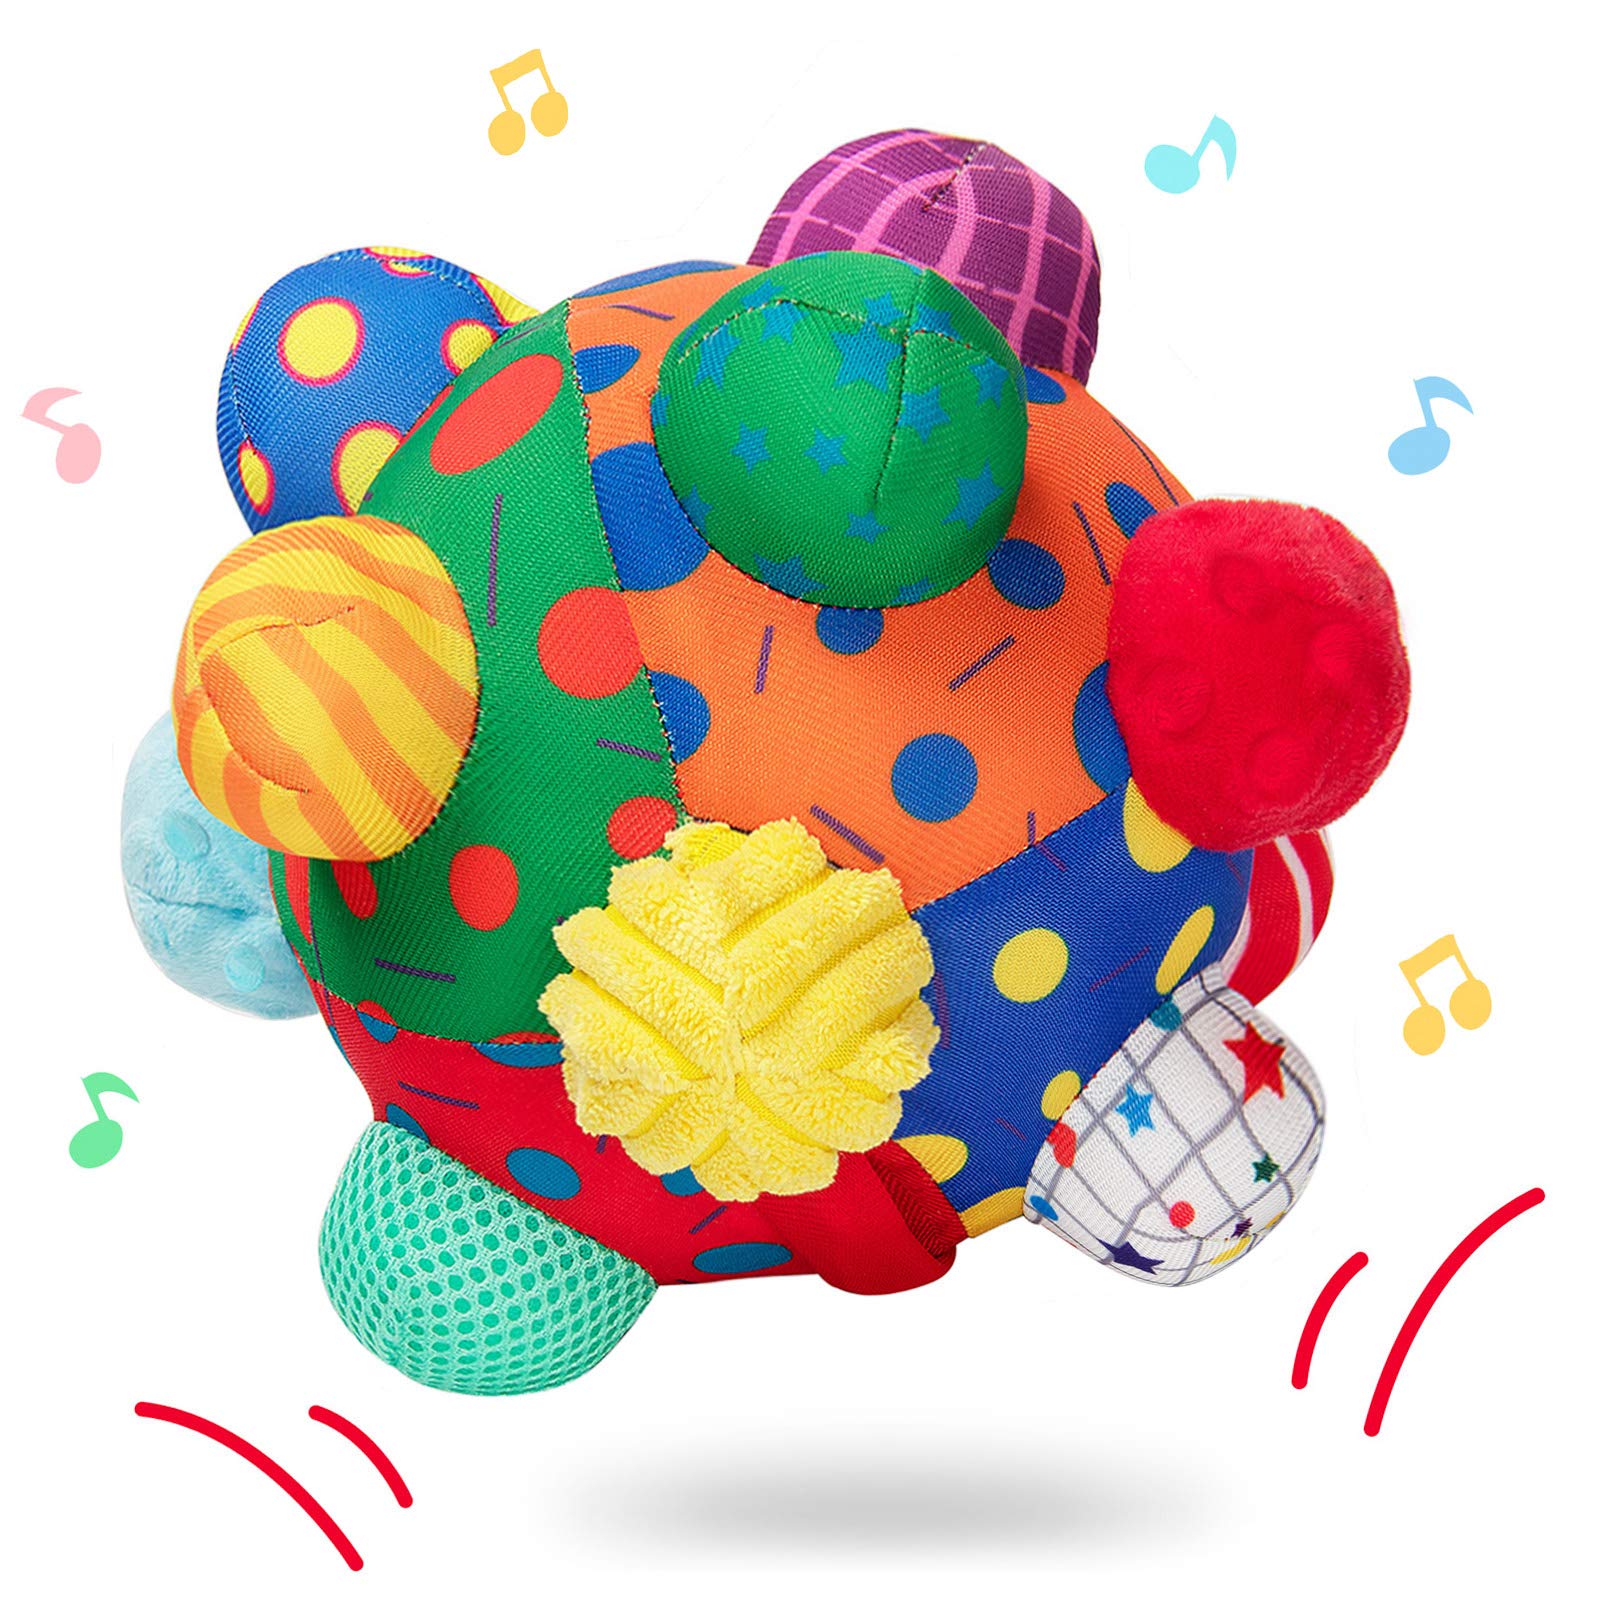 teytoy Baby Music Shake Dancing Ball Toy,Developmental Bumpy Ball Sensory Soft Toys,Easy to Grasp Bumps Help Develop Motor Skills for Girls and Boys Ages 12 Months and Up